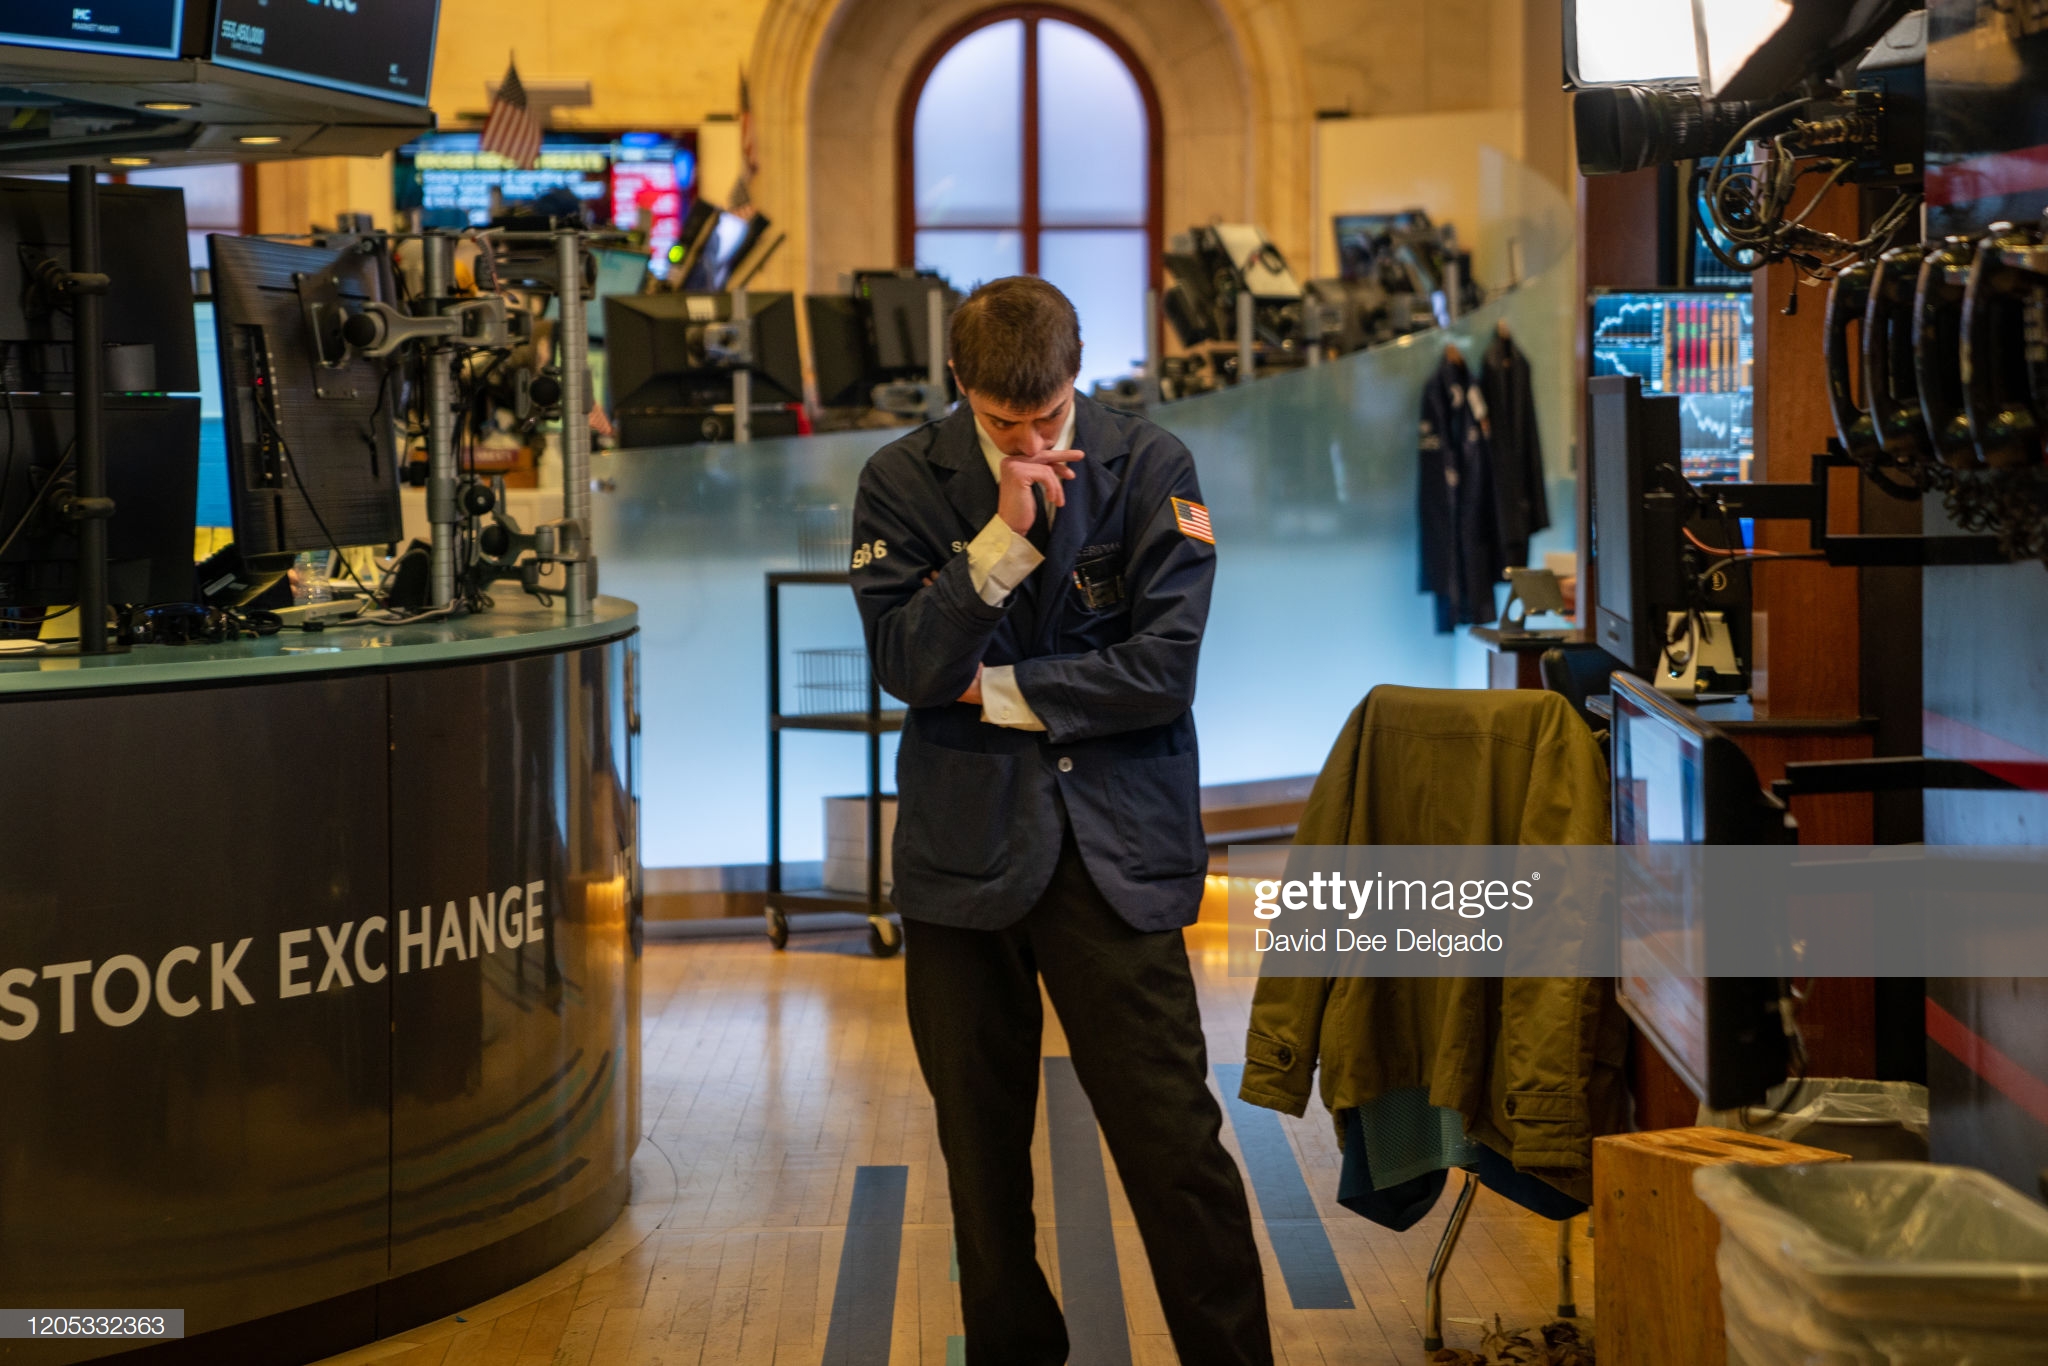 traders-work-the-floor-of-the-new-york-stock-exchange-on-march-5-2020-picture-id1205332363